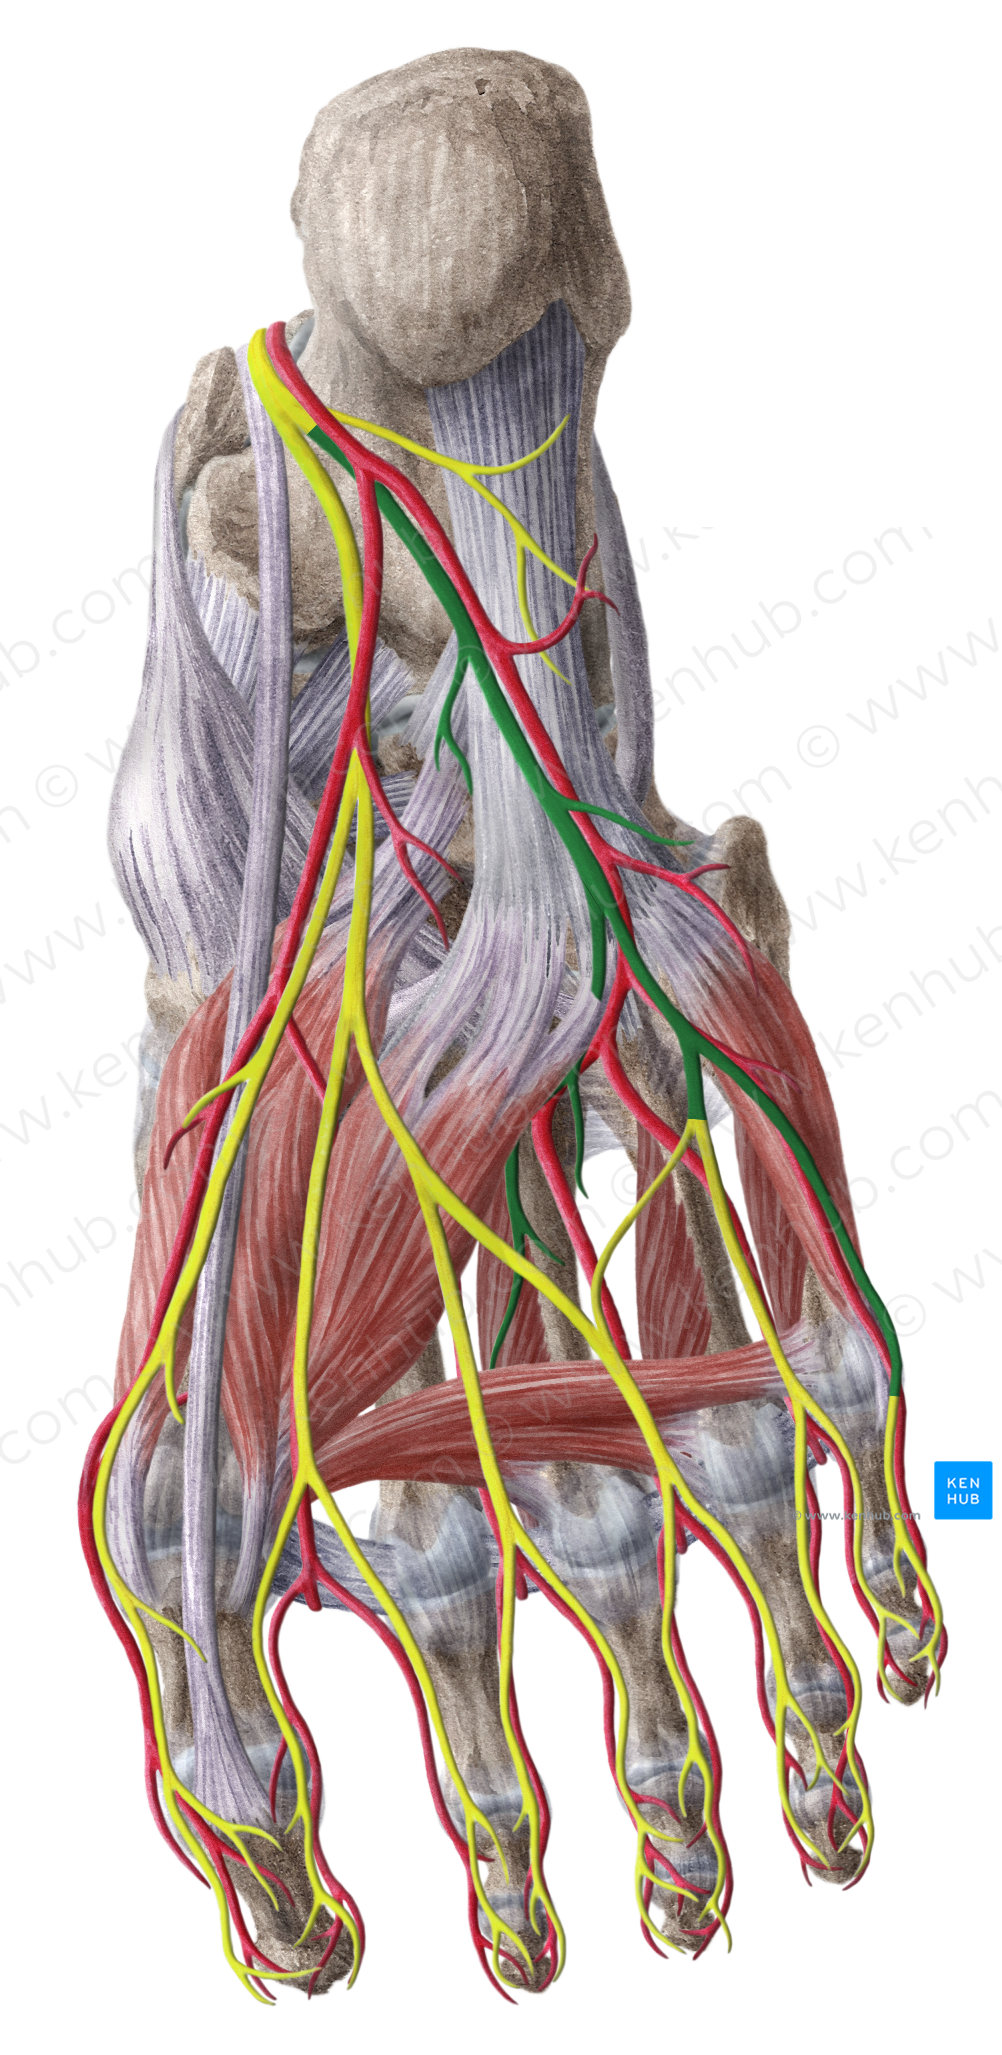 Lateral plantar nerve (#6696)